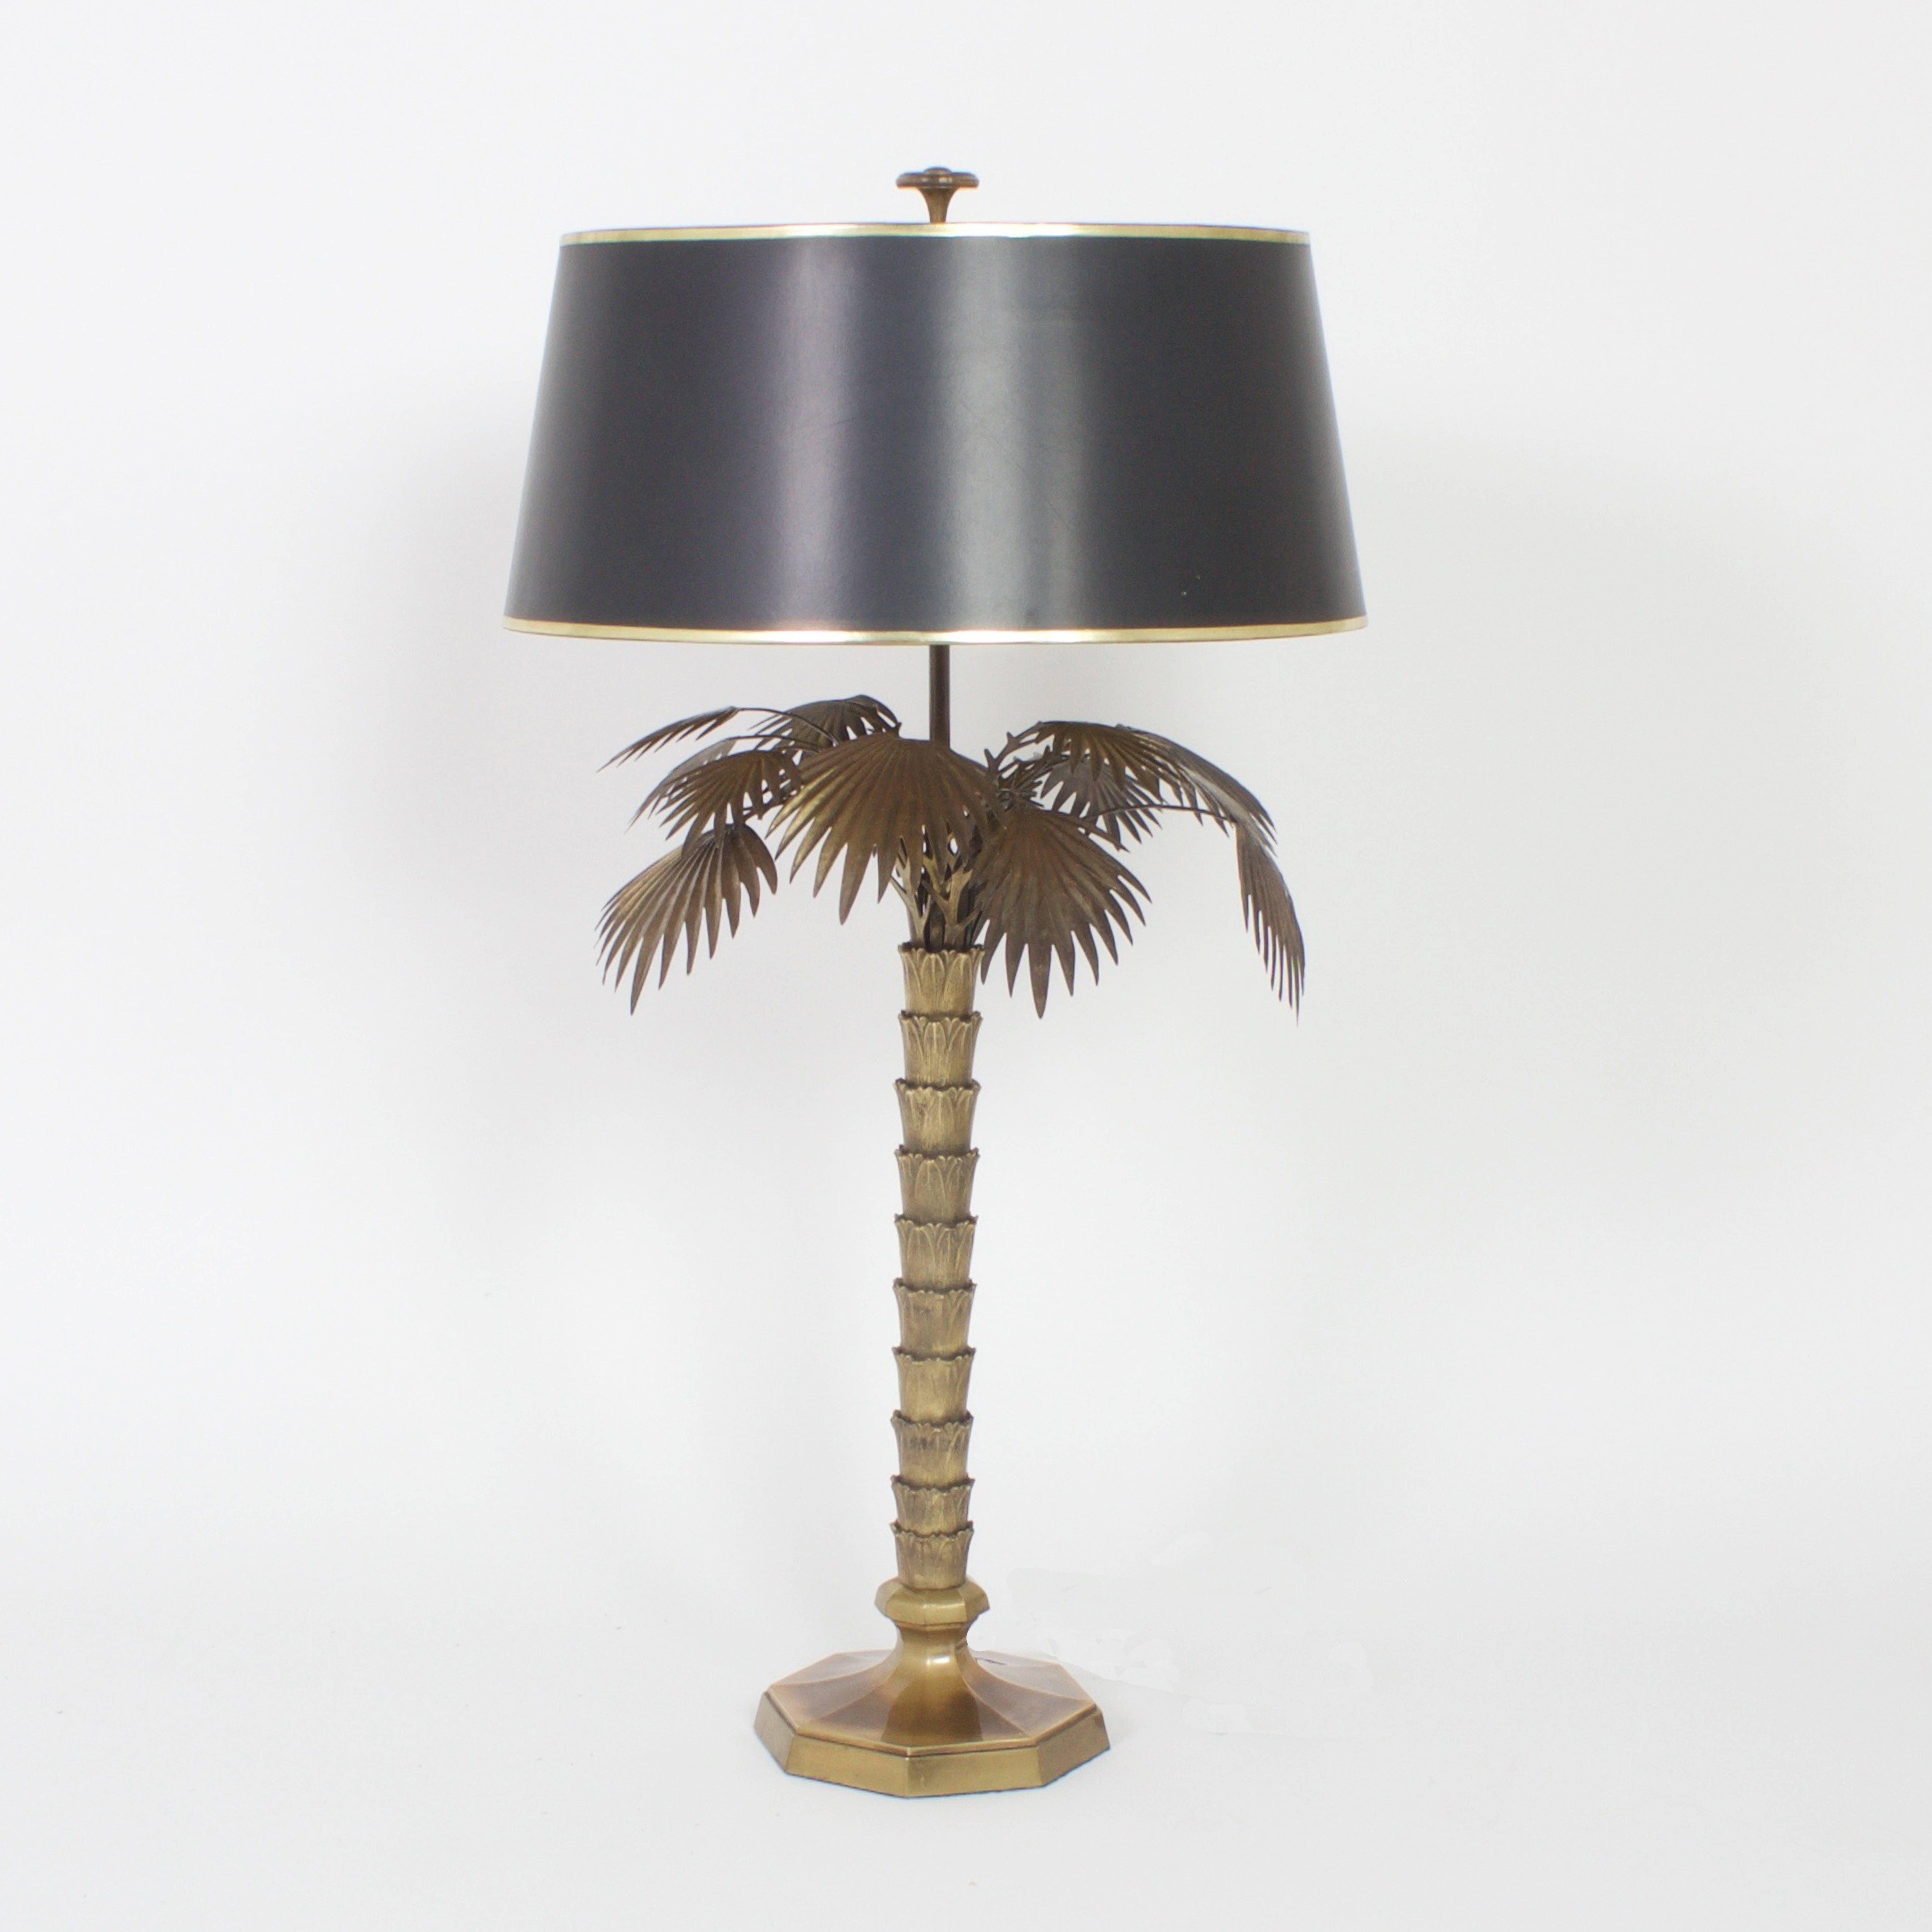 Chic Mid-Century pair of bronze palm tree table lamps. Featuring crisp stylized castings and a warm patina. The boulotte style black shades are lined with Classic acid dotted gold paper and have perforated tole light diffusers on top. These lamps